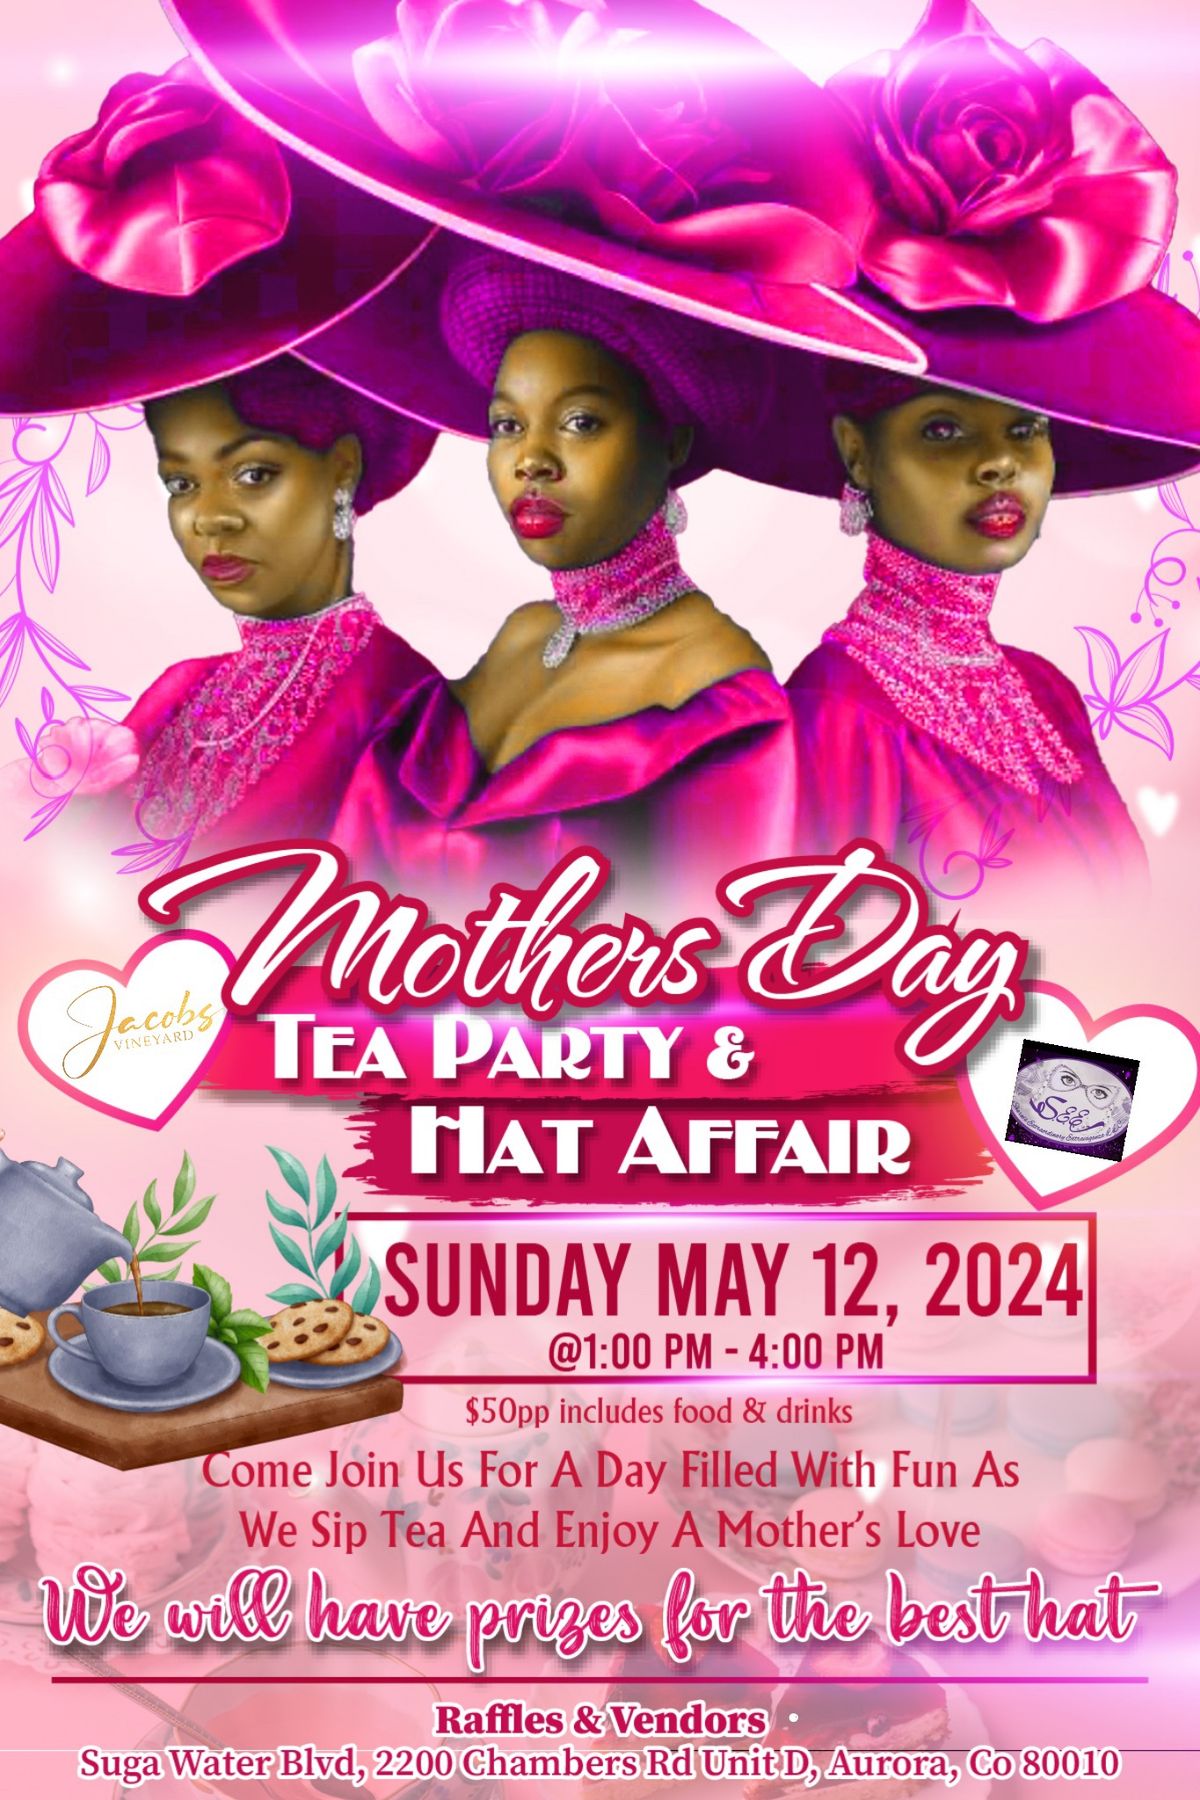 Mothers Day Tea Party & Hat Affair 